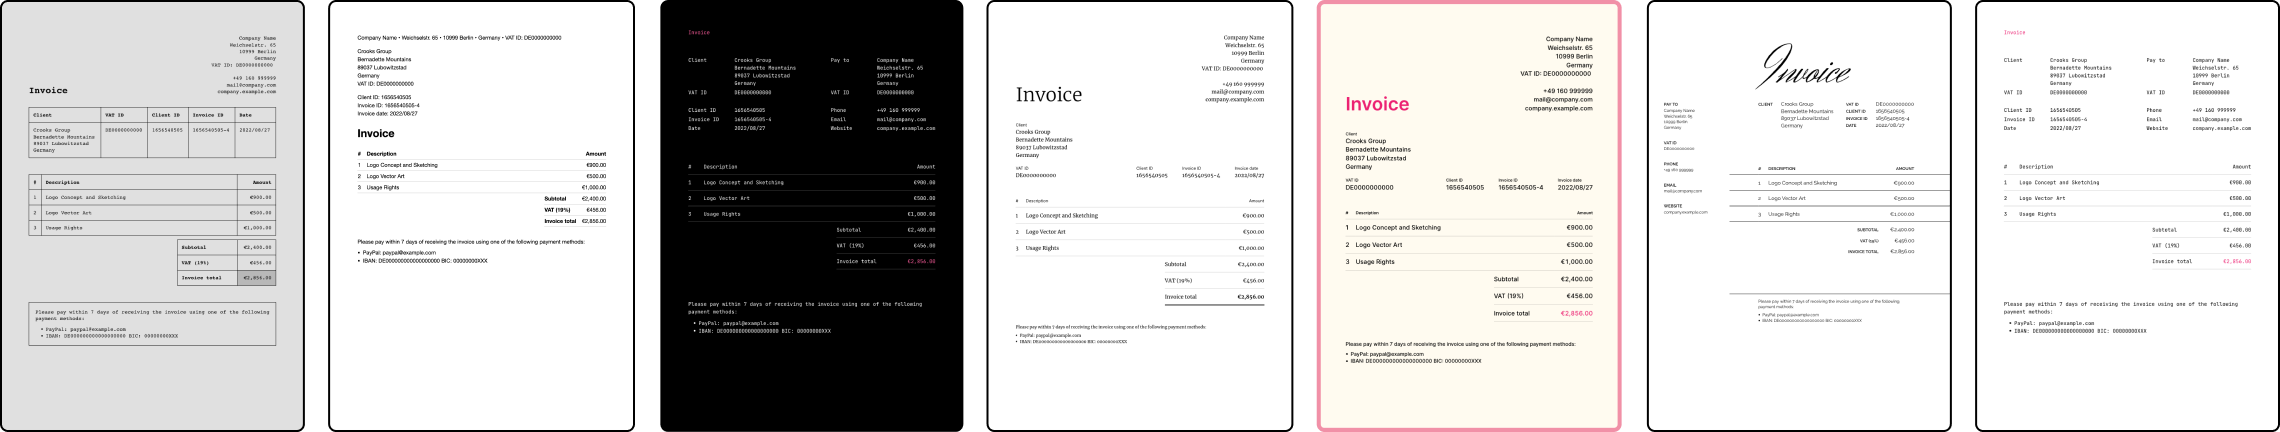 Showcase of different invoice templates available in Cakedesk